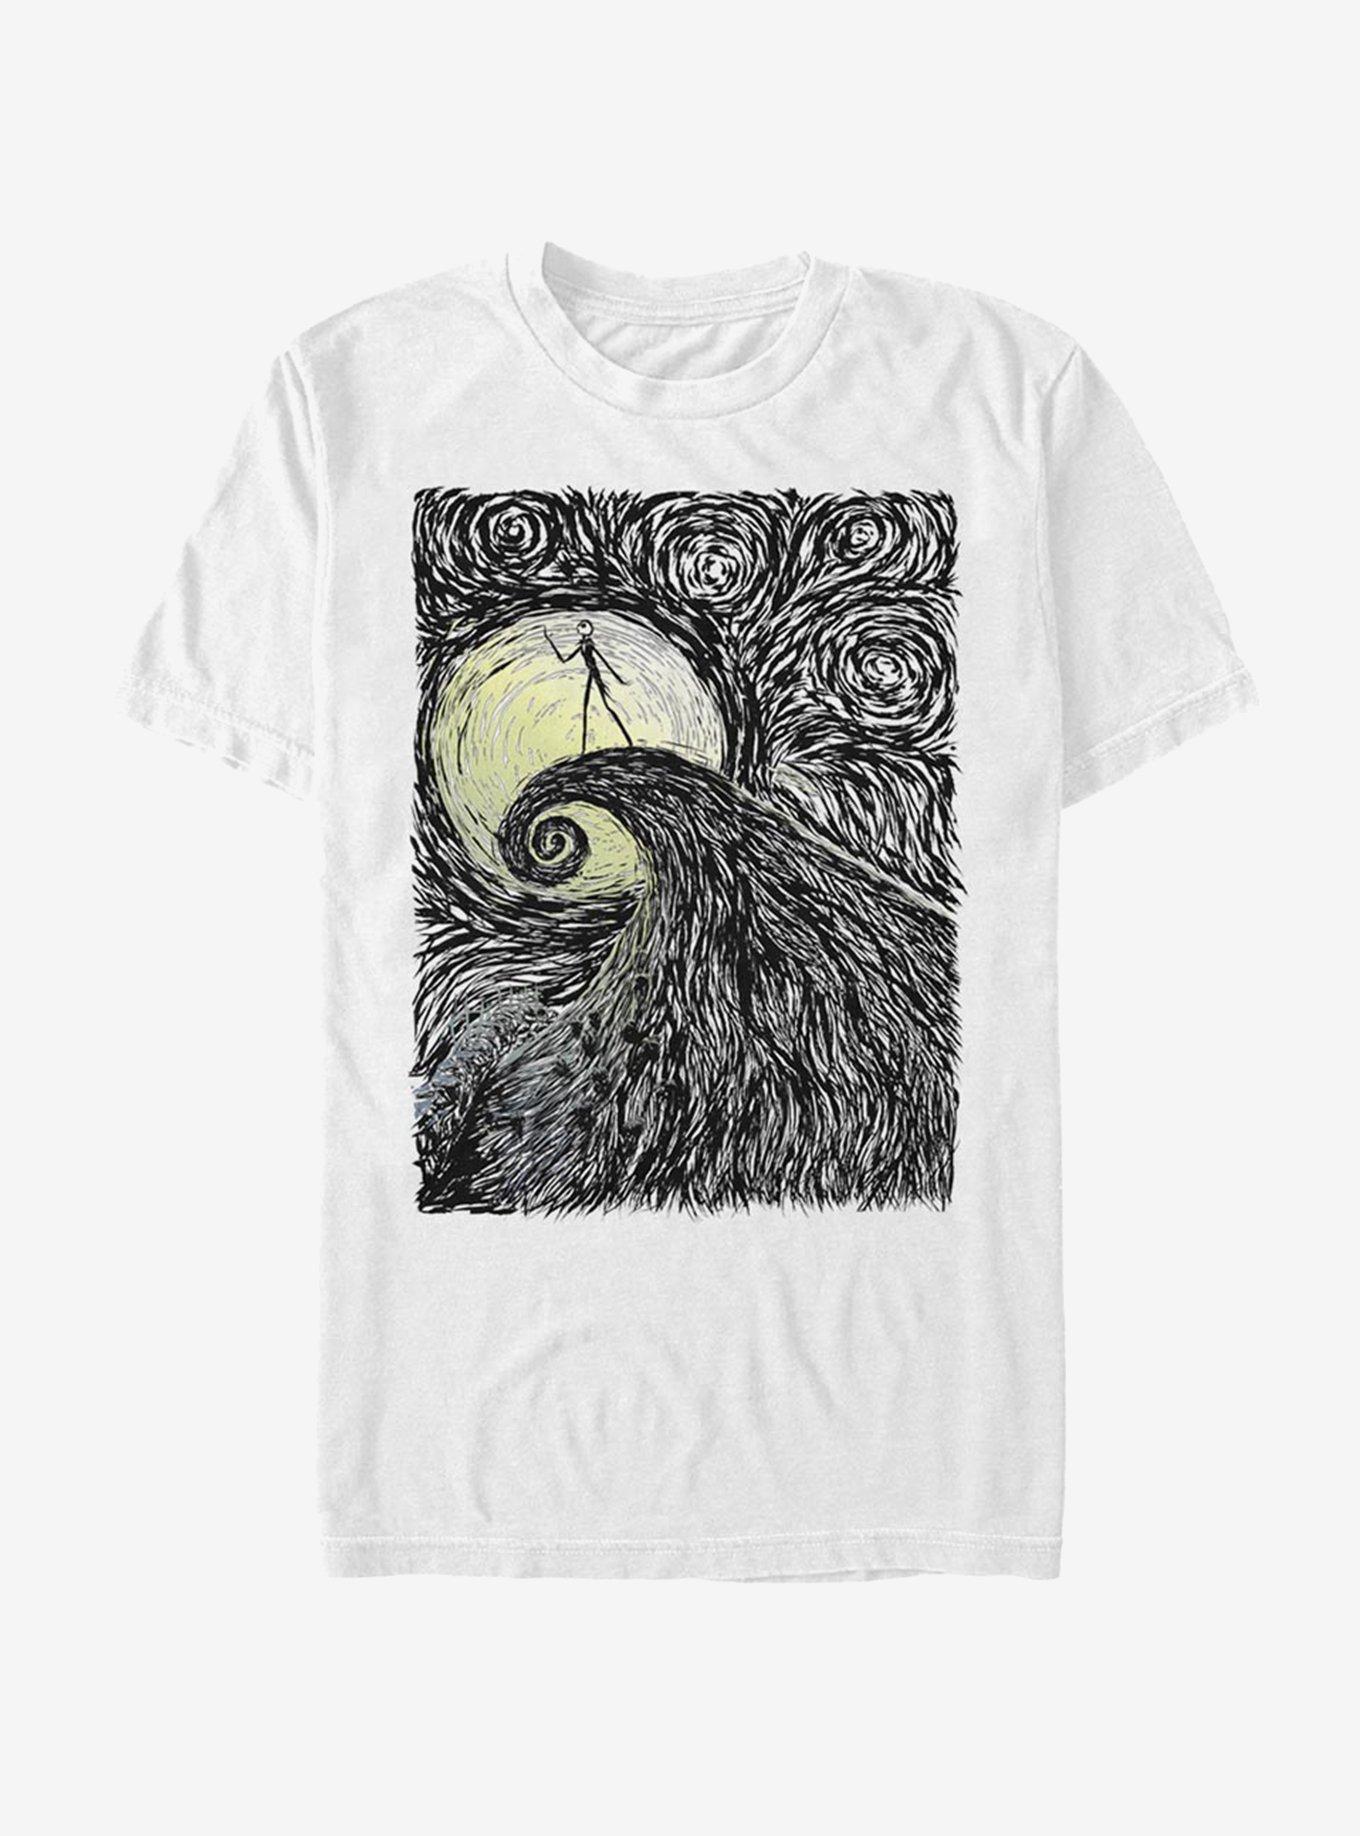 Disney The Nightmare Before Christmas Spiral Hill T-Shirt, WHITE, hi-res